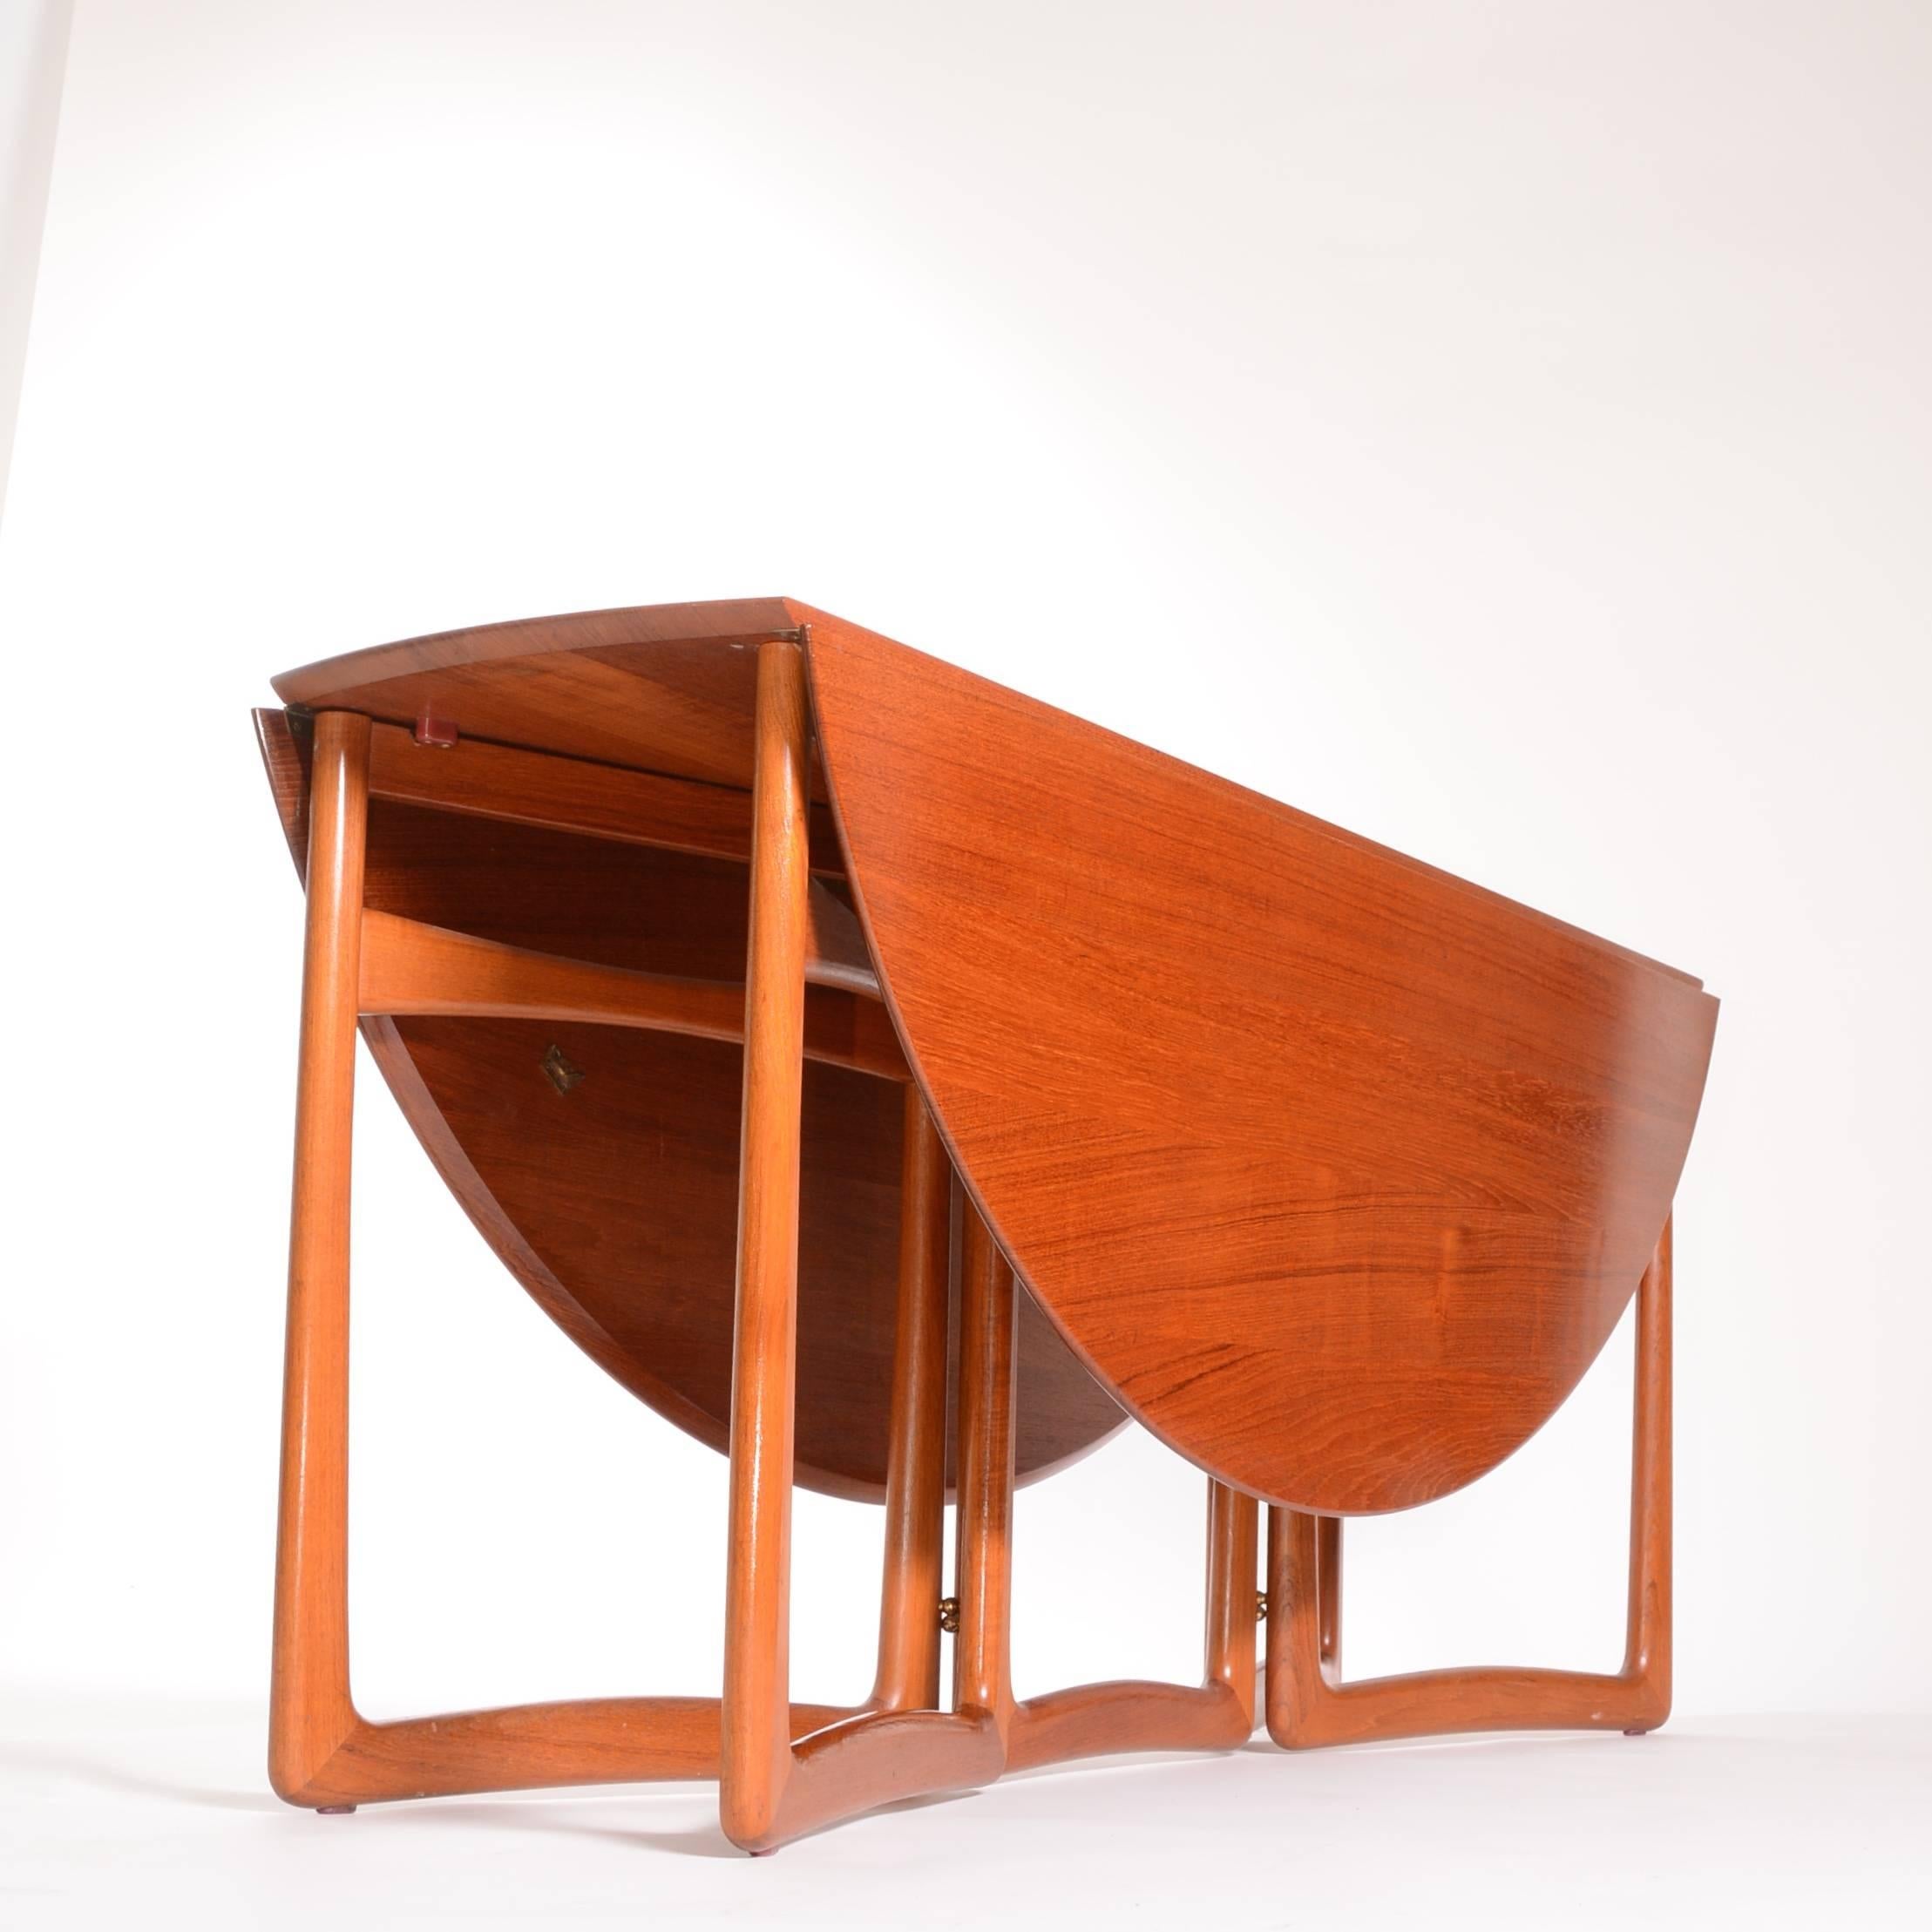 Beautiful dining table made from solid teak designed by Peter Hvidt and Mølgaard for France and Daverkosen, Denmark. This piece is in excellent condition.